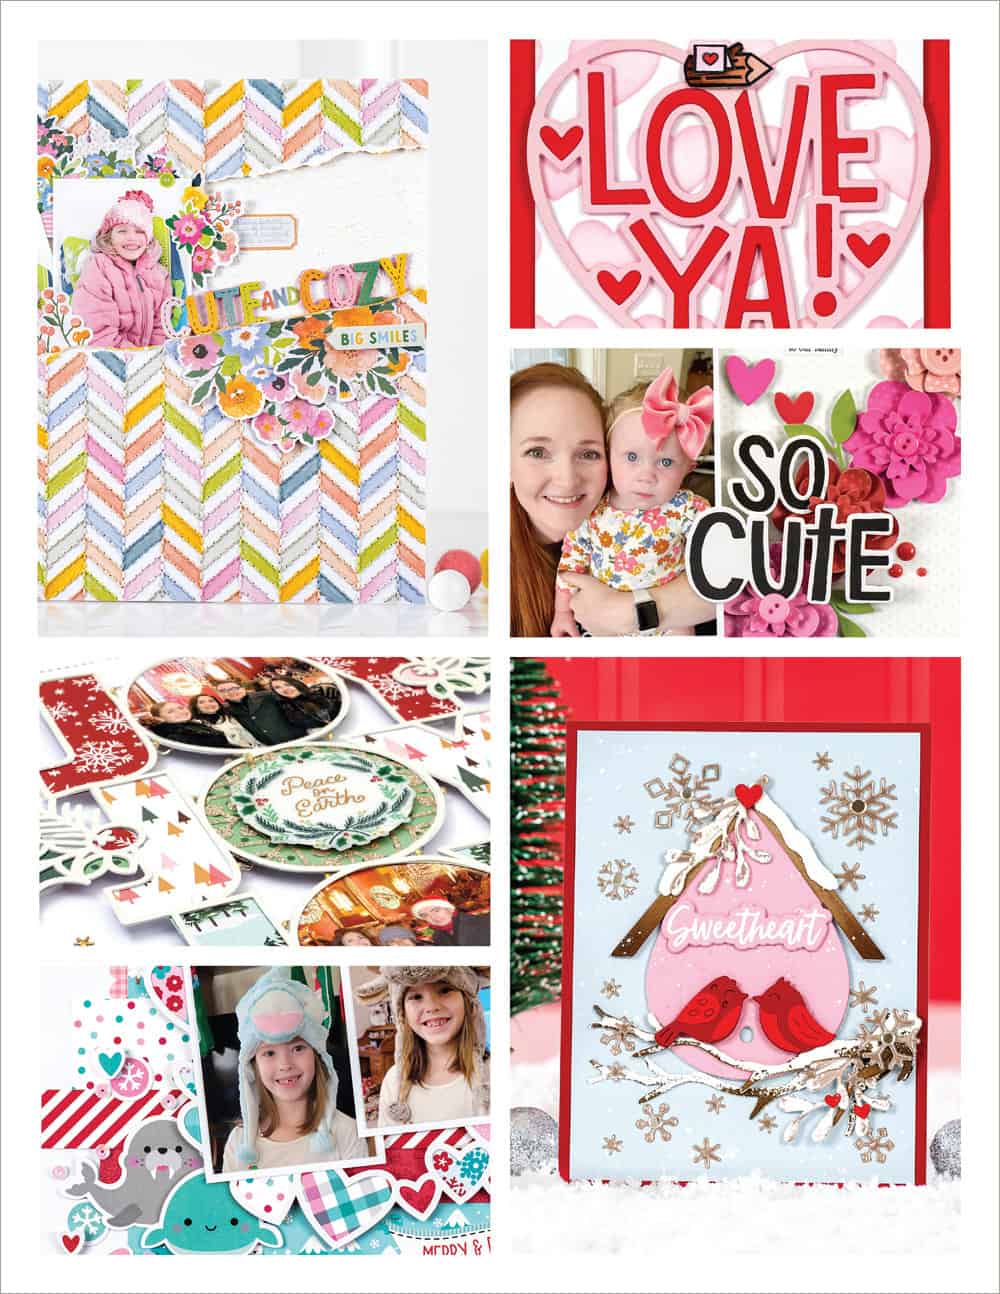 Patterned Paper Play Class - Scrapbook & Cards Today Magazine